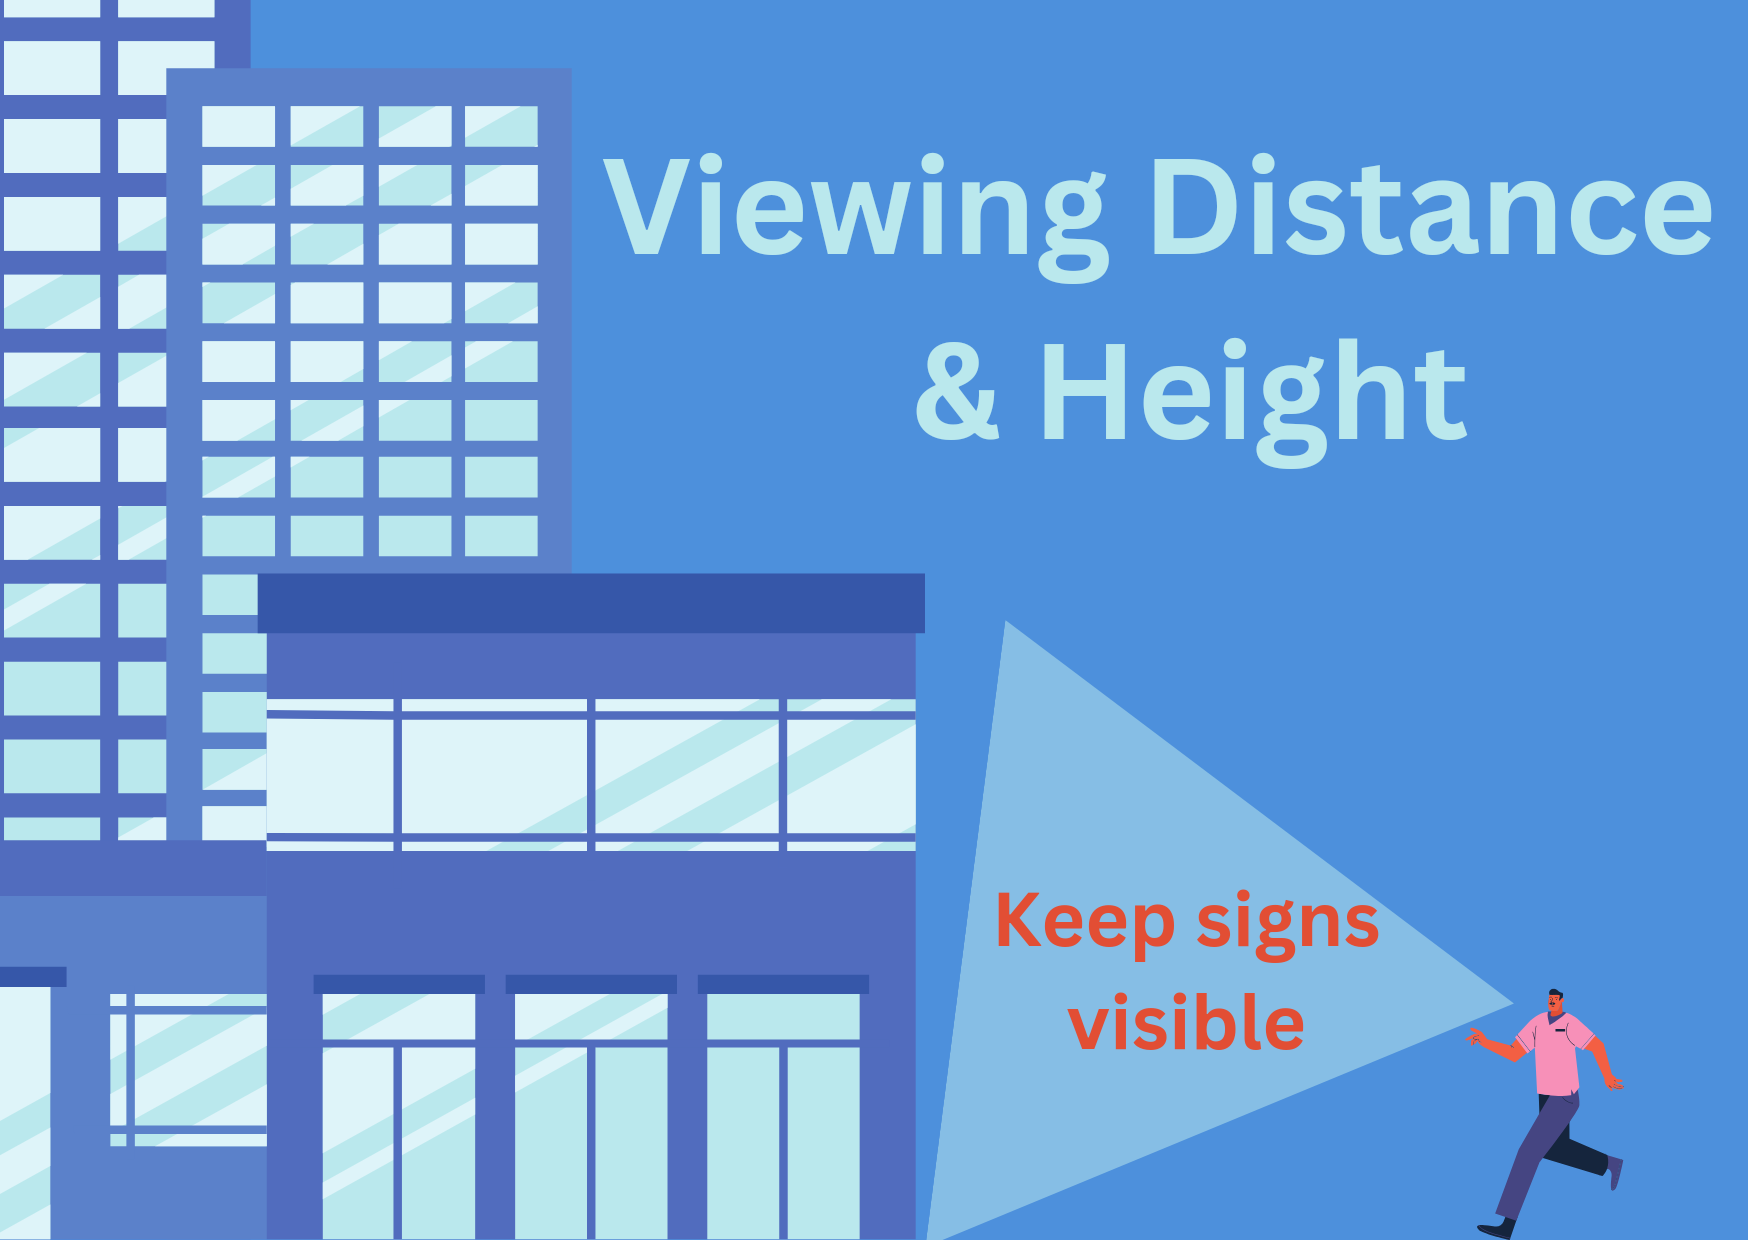 Viewing angle, height and distance outdoors are important factors